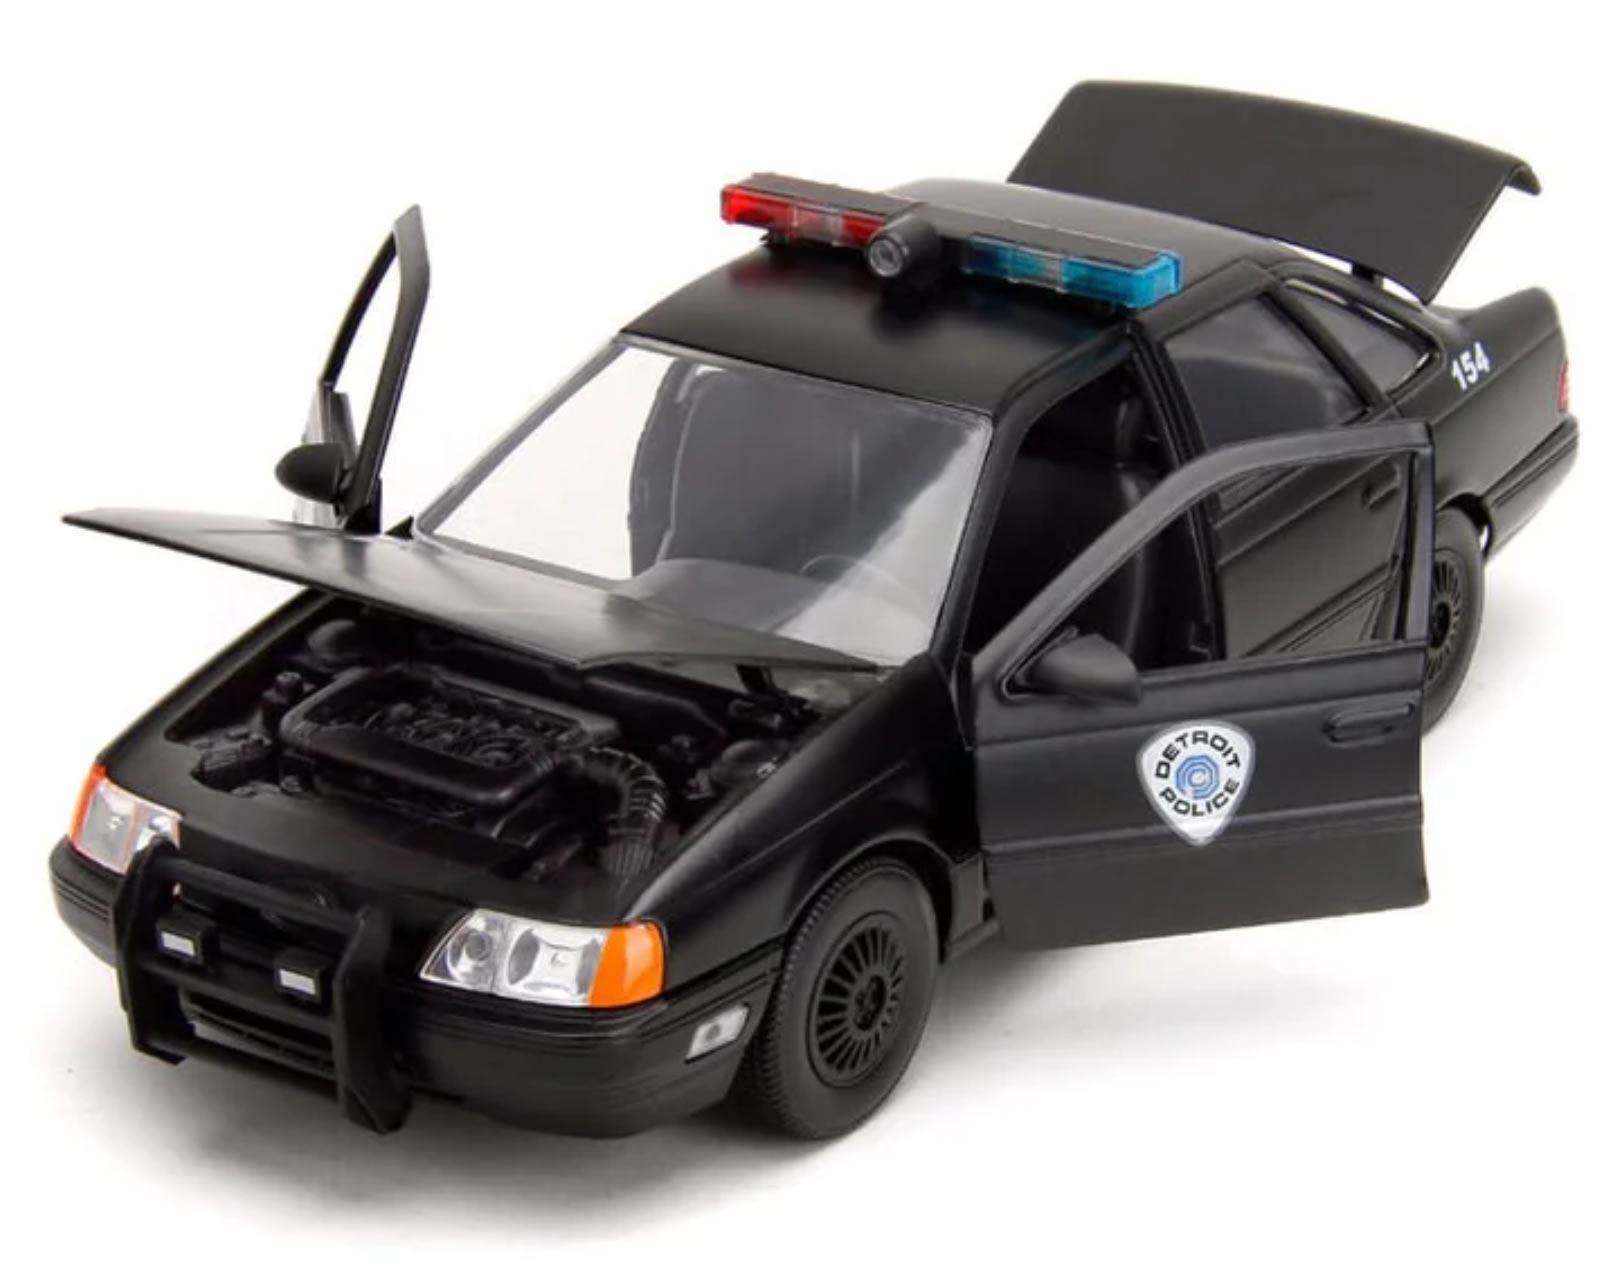 Hollywood Rides 1/24 OCP Ford Taurus with RoboCop Figure # 33743